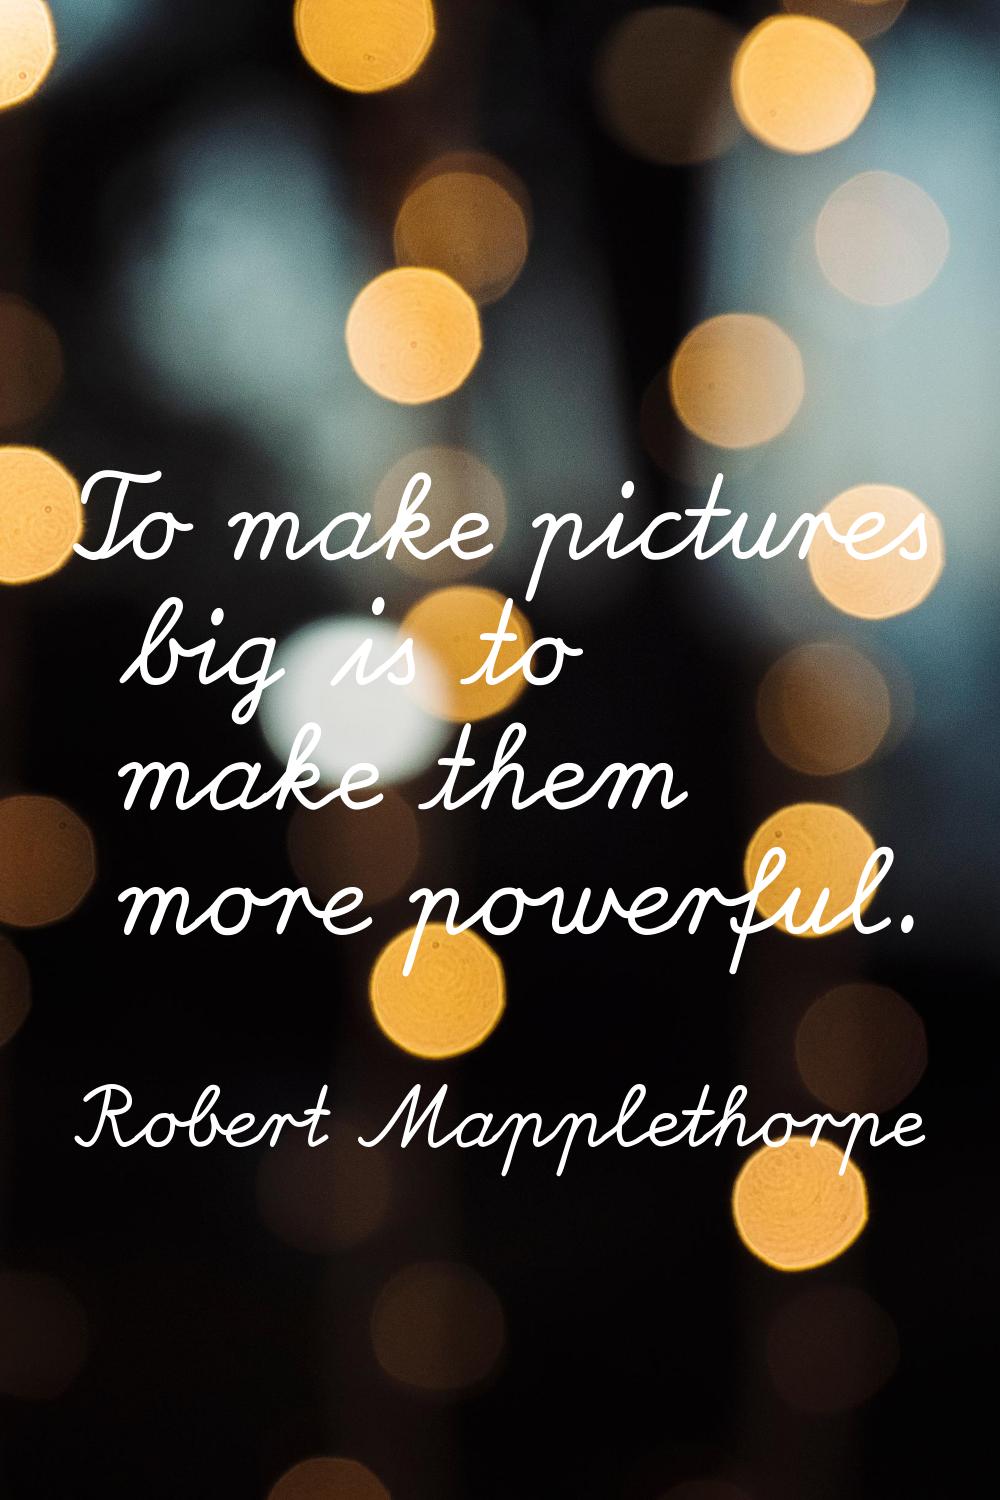 To make pictures big is to make them more powerful.